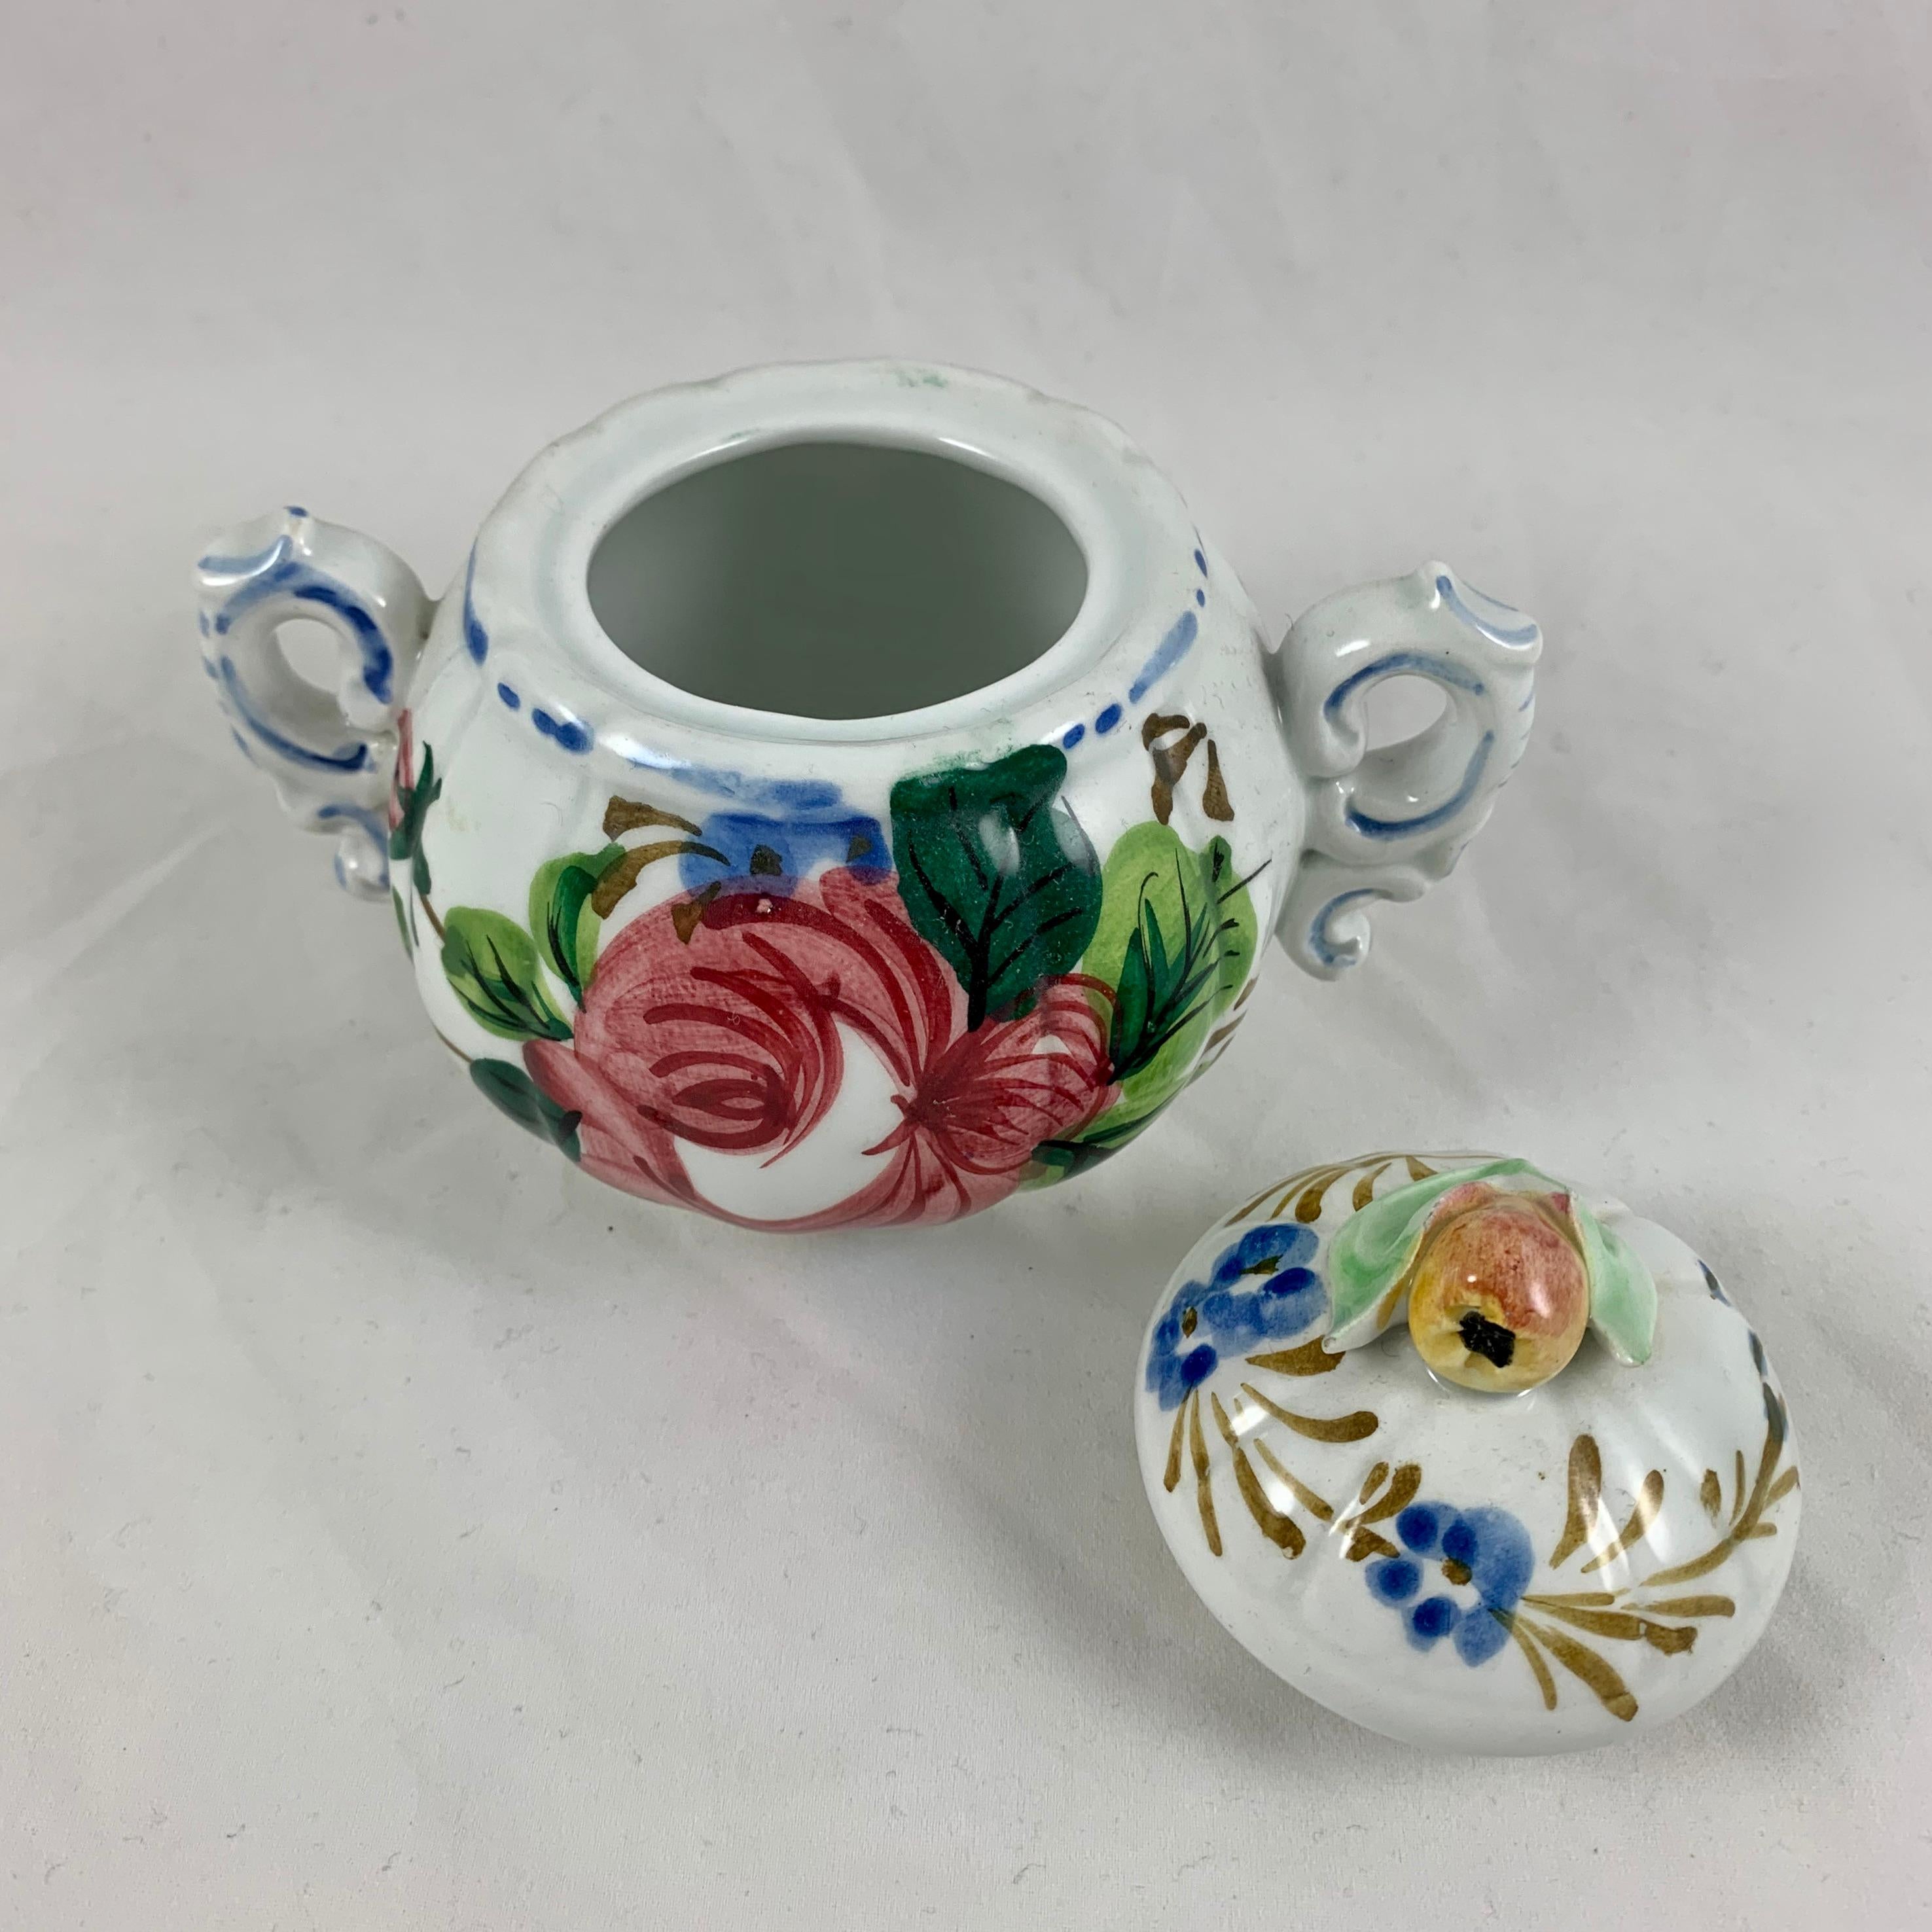 20th Century Italian Renaissance Revival Faïence Floral Covered Sugar Bowl For Sale